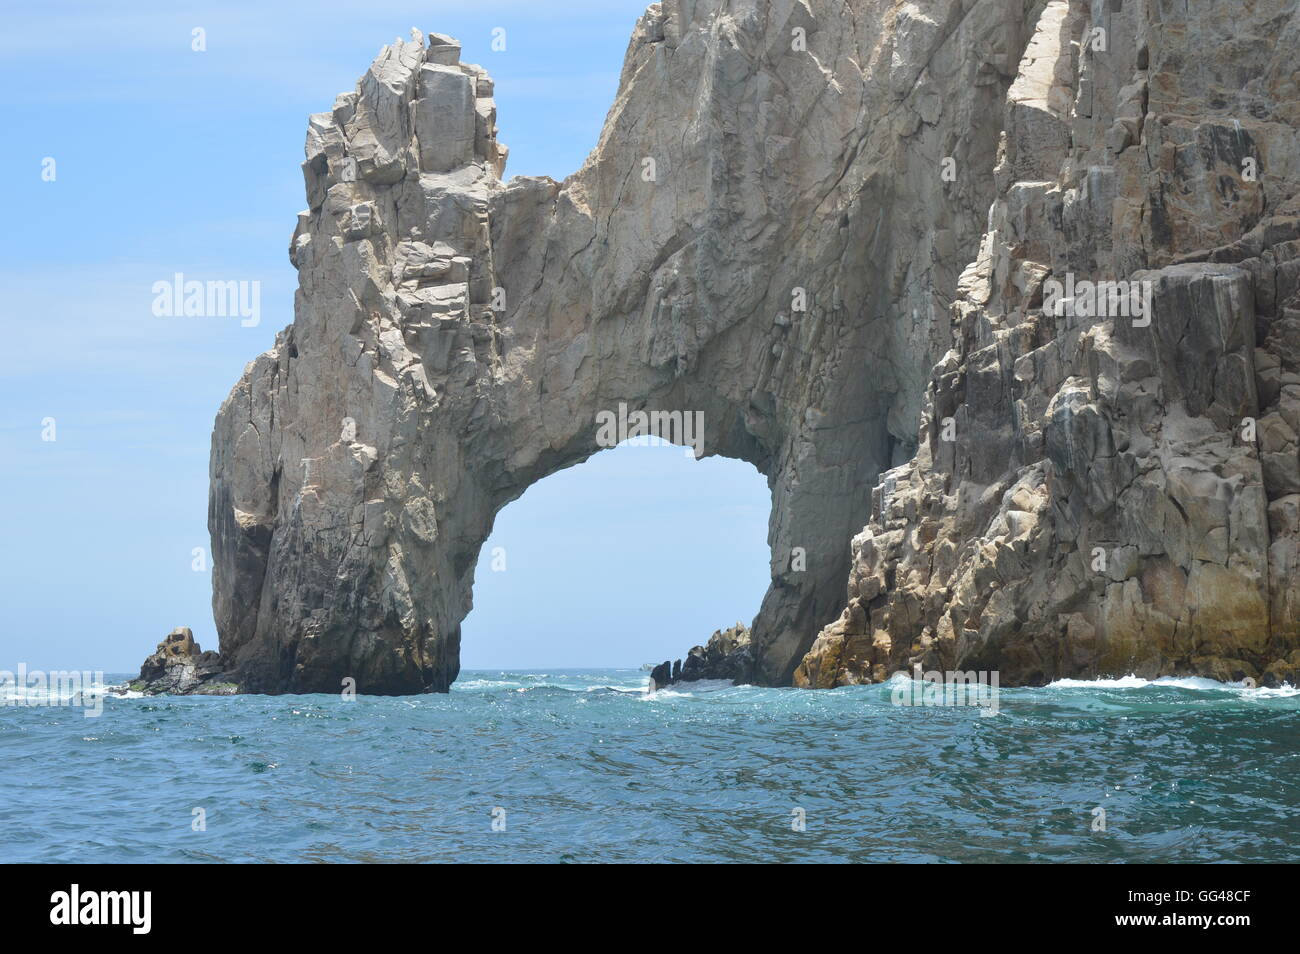 The ever so famous Cabo Arch located where the Atlantic and Pacific meet. Stock Photo